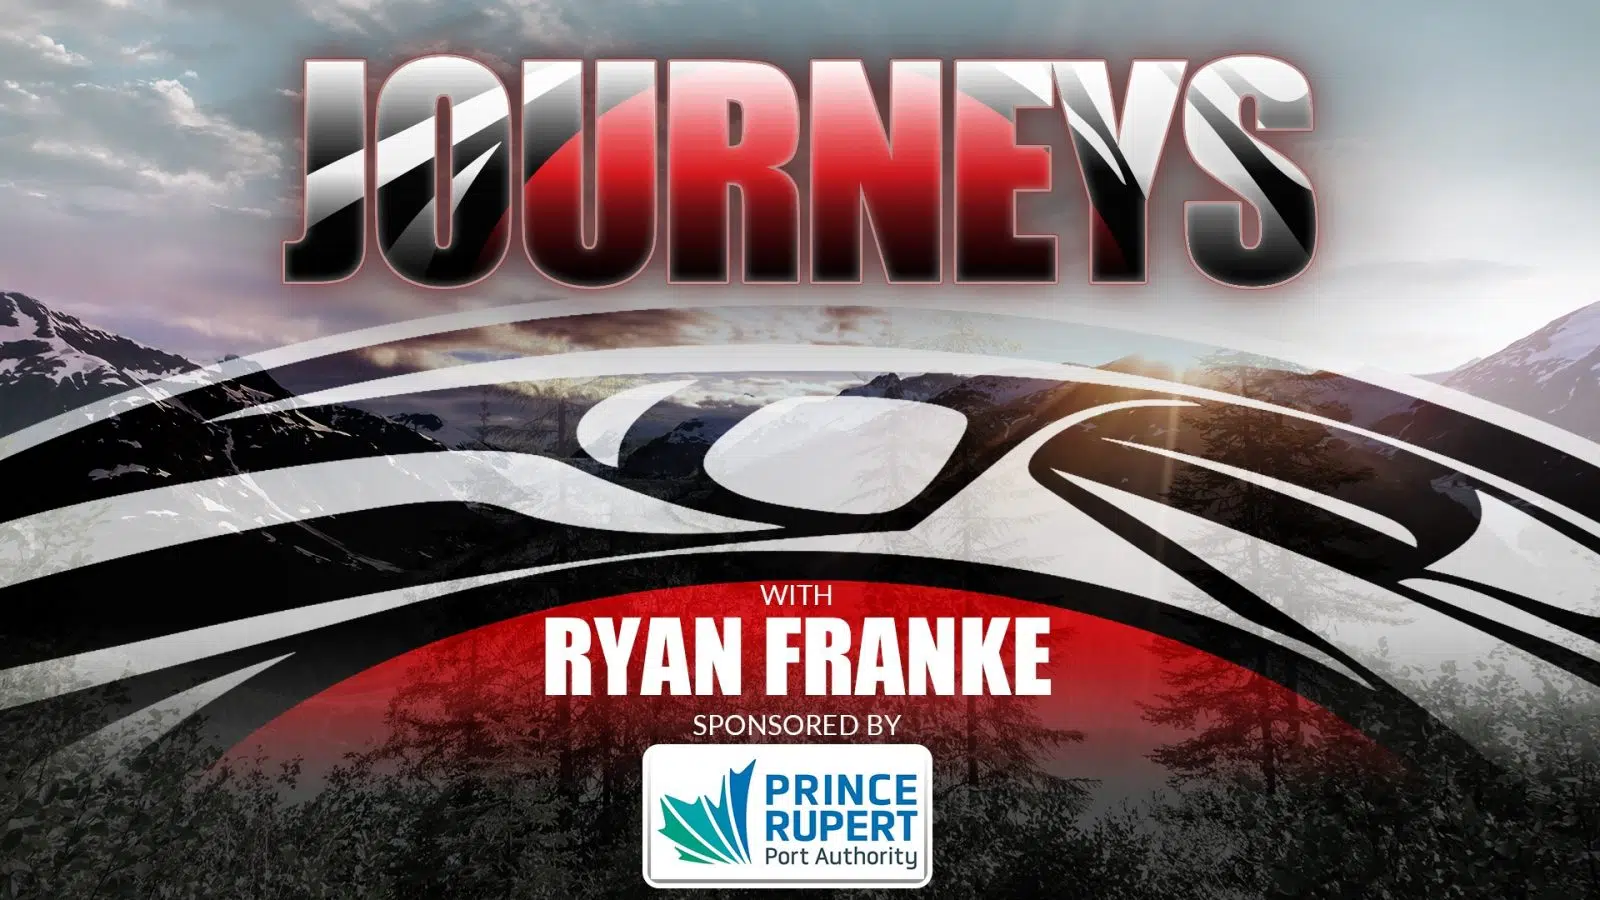 CFNR-Journeys-with-Ryan-Franke-sponsored-by-Prince-Rupert-Port-Authority